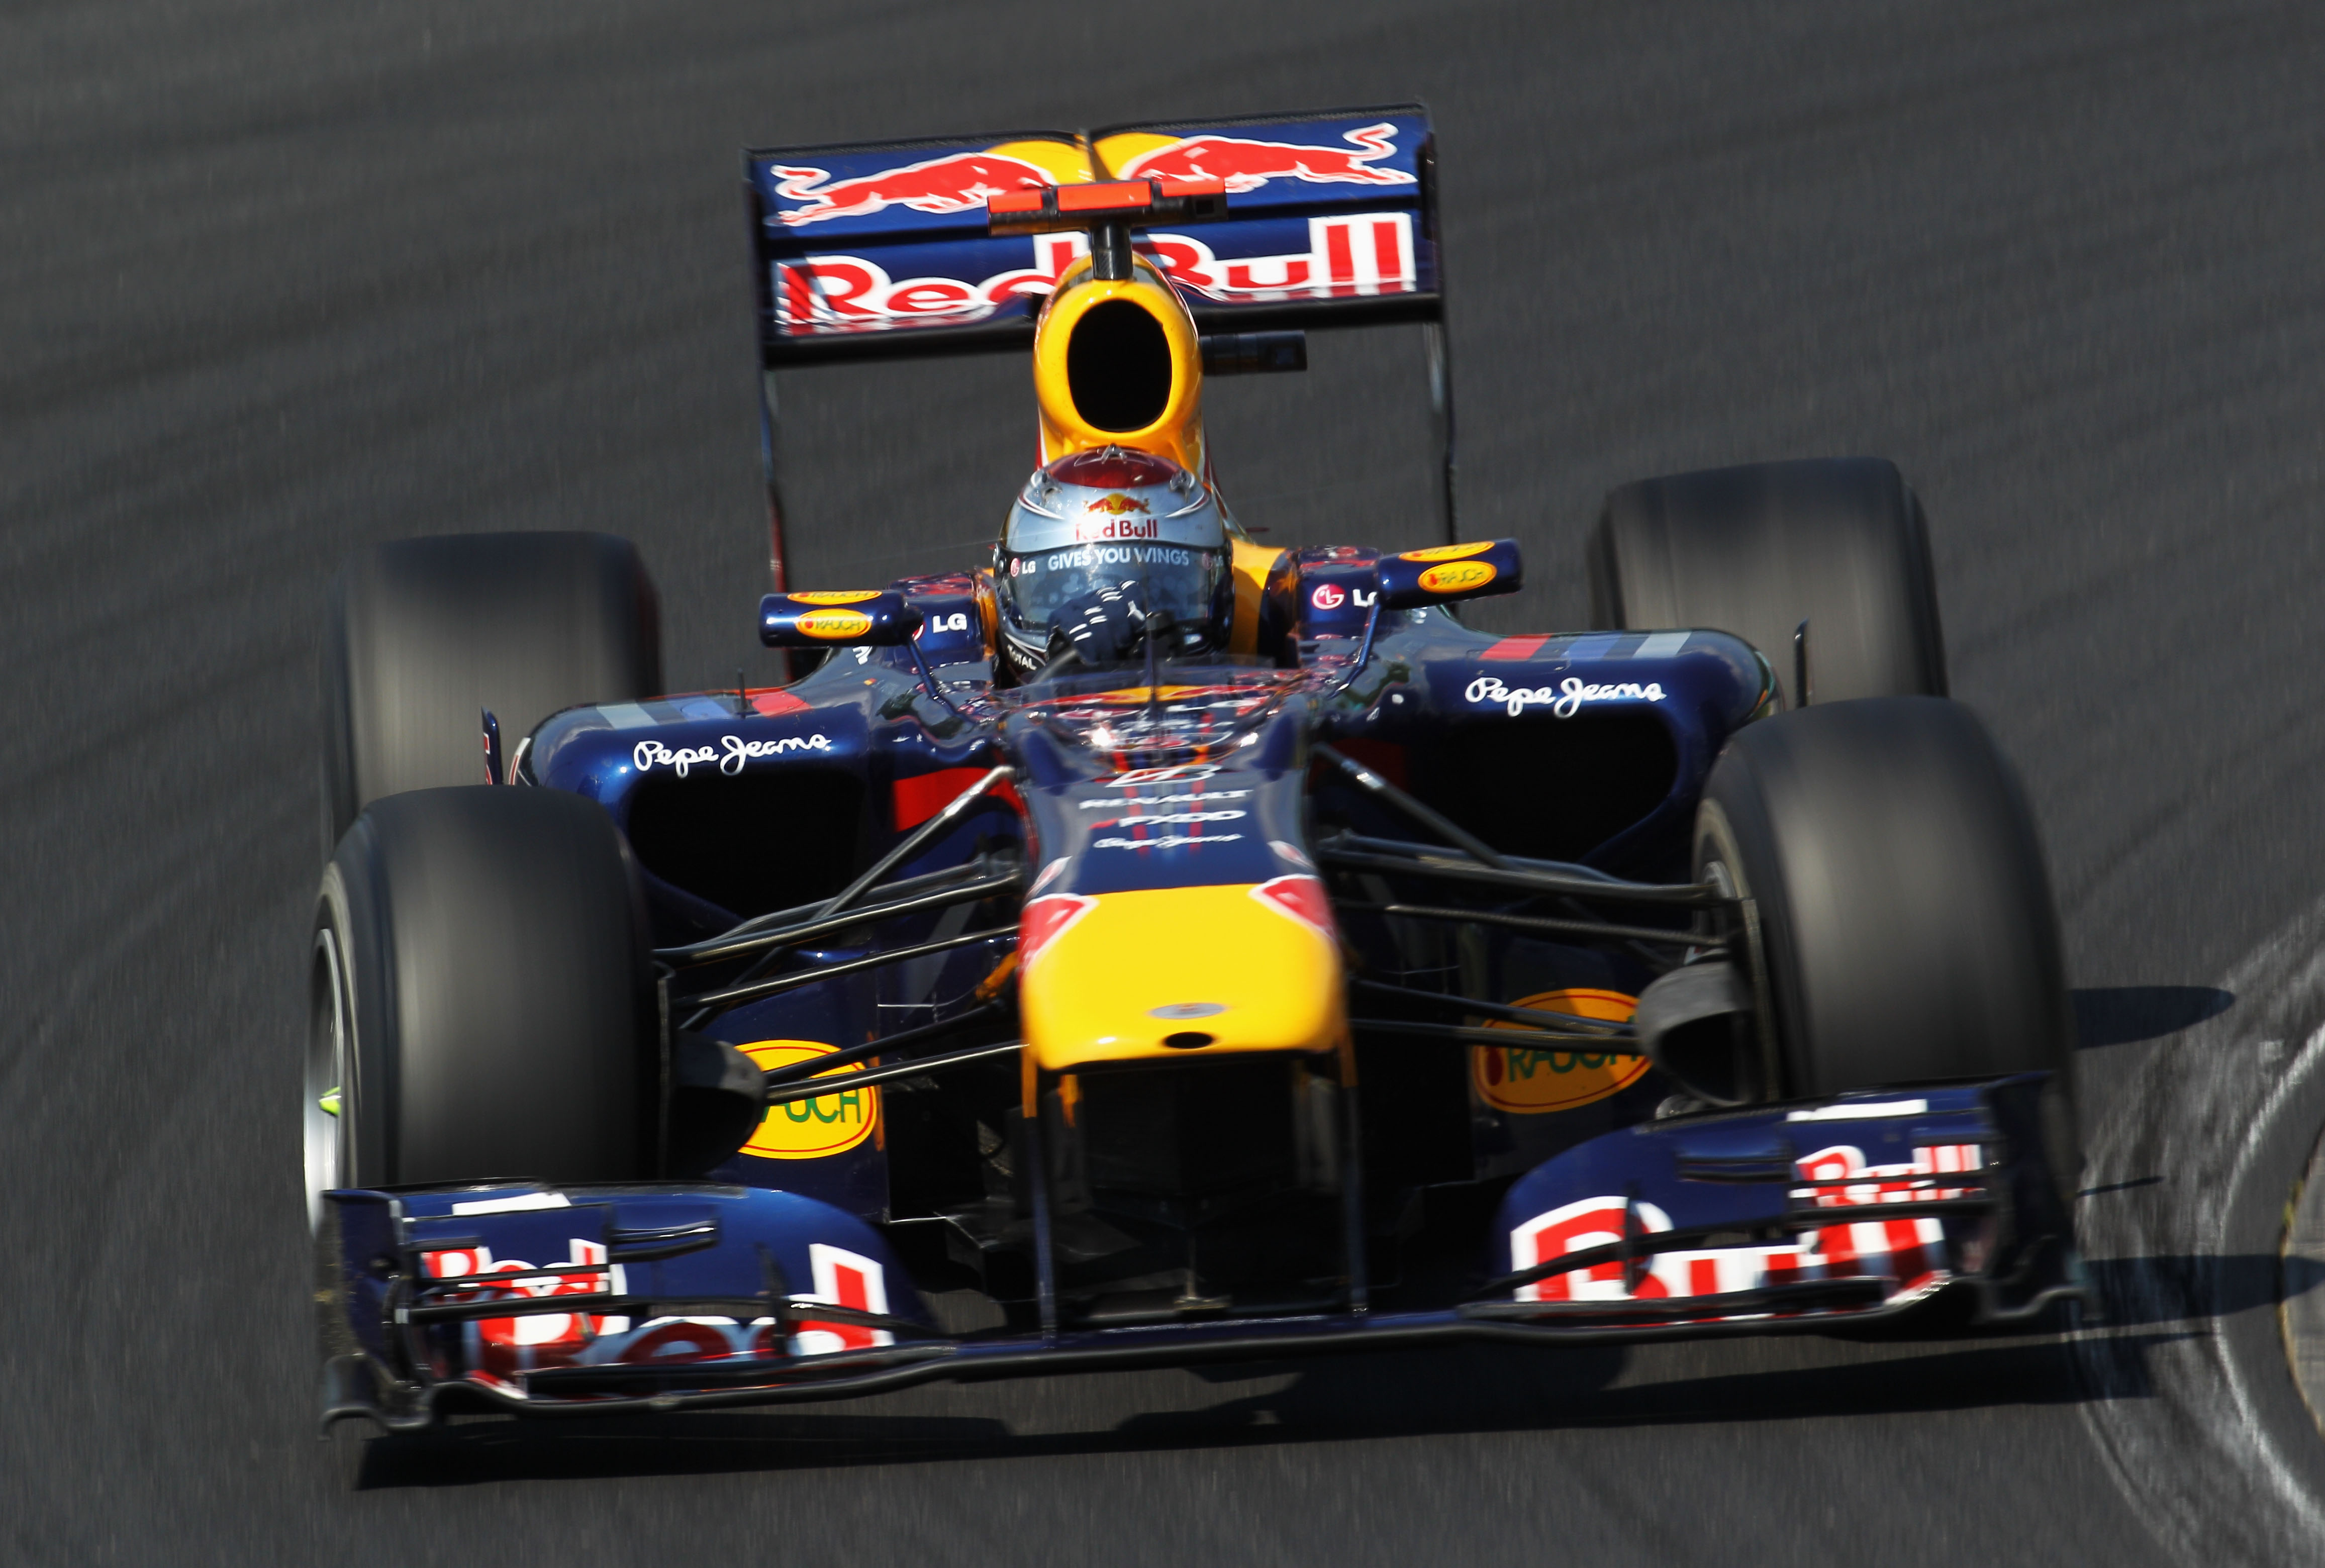 BUDAPEST, HUNGARY - AUGUST 01:  Sebastian Vettel of Germany and Red Bull Racing drives during the Hungarian Formula One Grand Prix at the Hungaroring on August 1, 2010 in Budapest, Hungary.  (Photo by Paul Gilham/Getty Images)